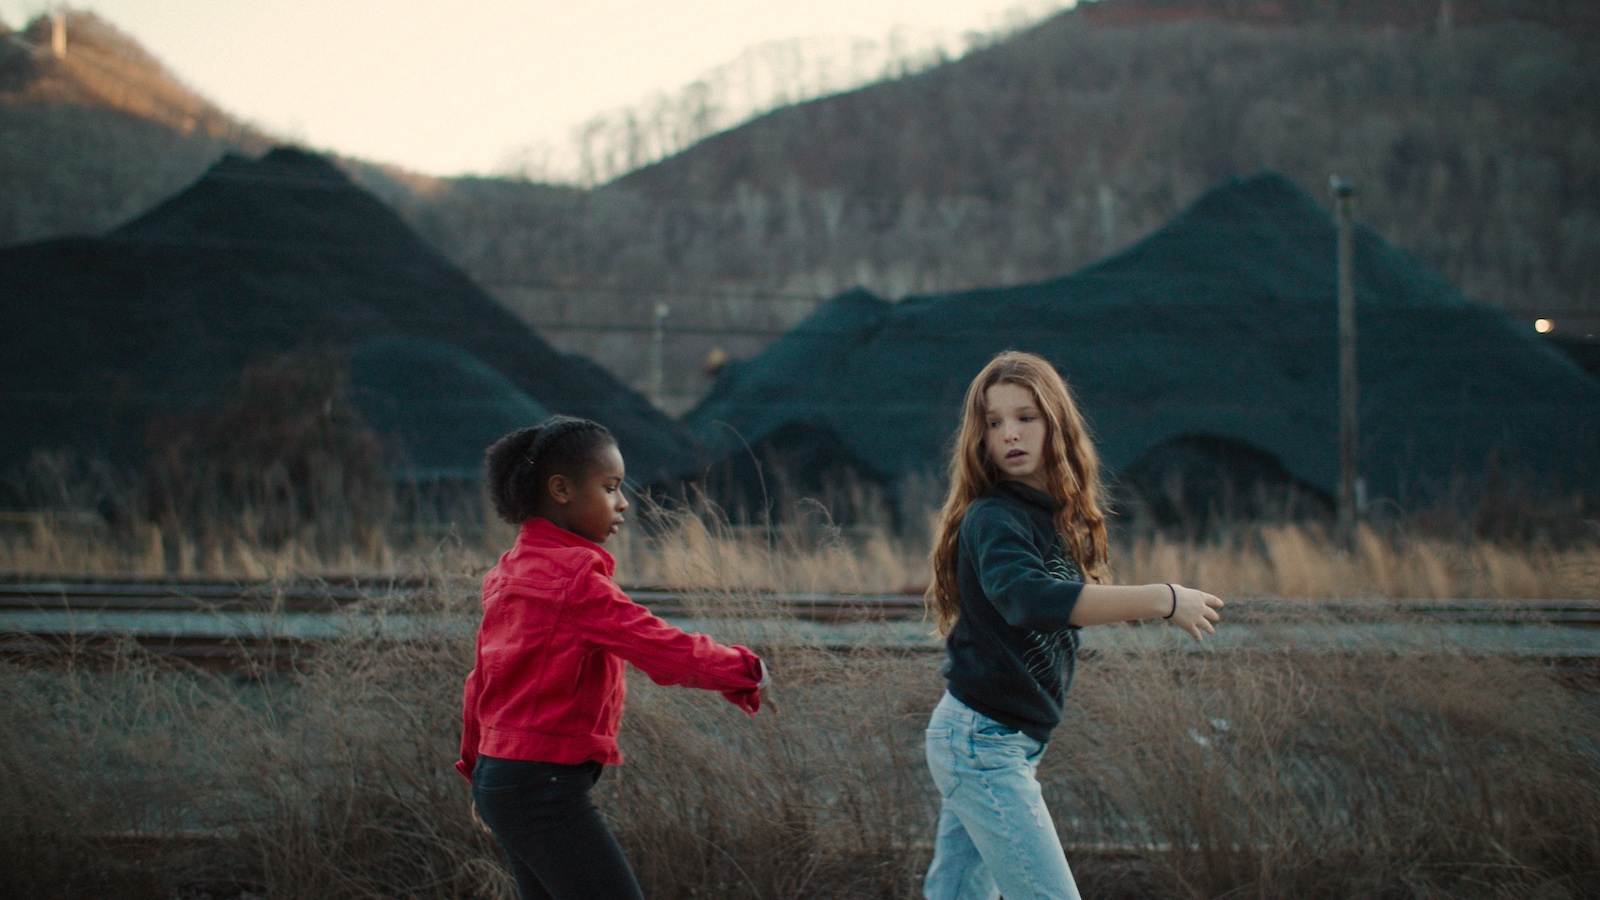 A Black girl in a red jacket and a white girl in a blue jacket together walk against the backdrop of mountains